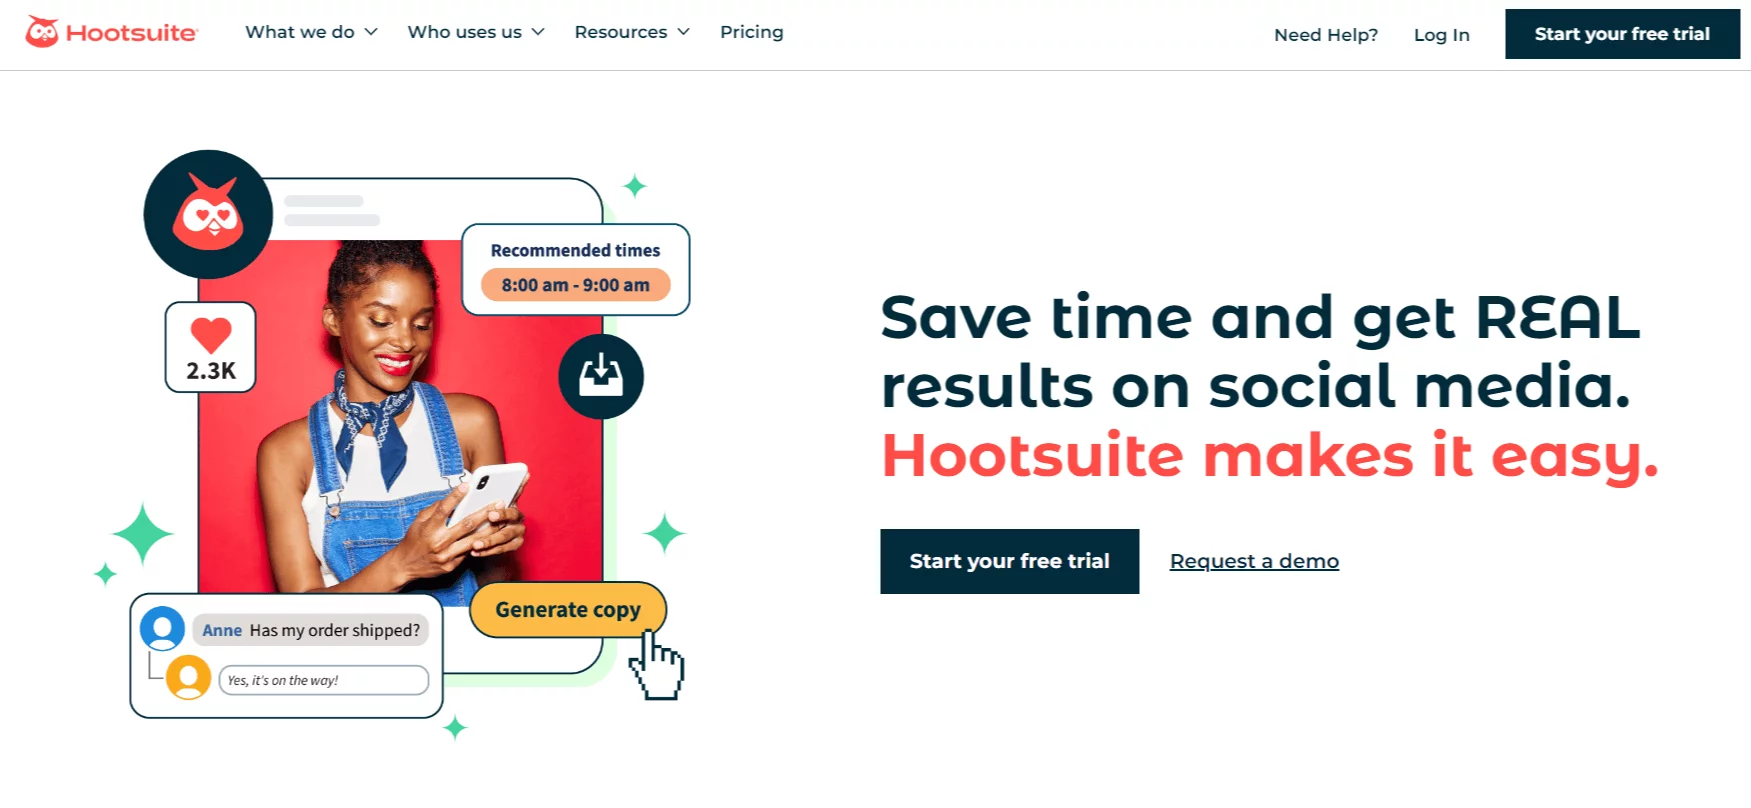 Hootsuite homepage showing a stylised social media post with recommended posting times, number of reactions, and buttons to generate copy or download.